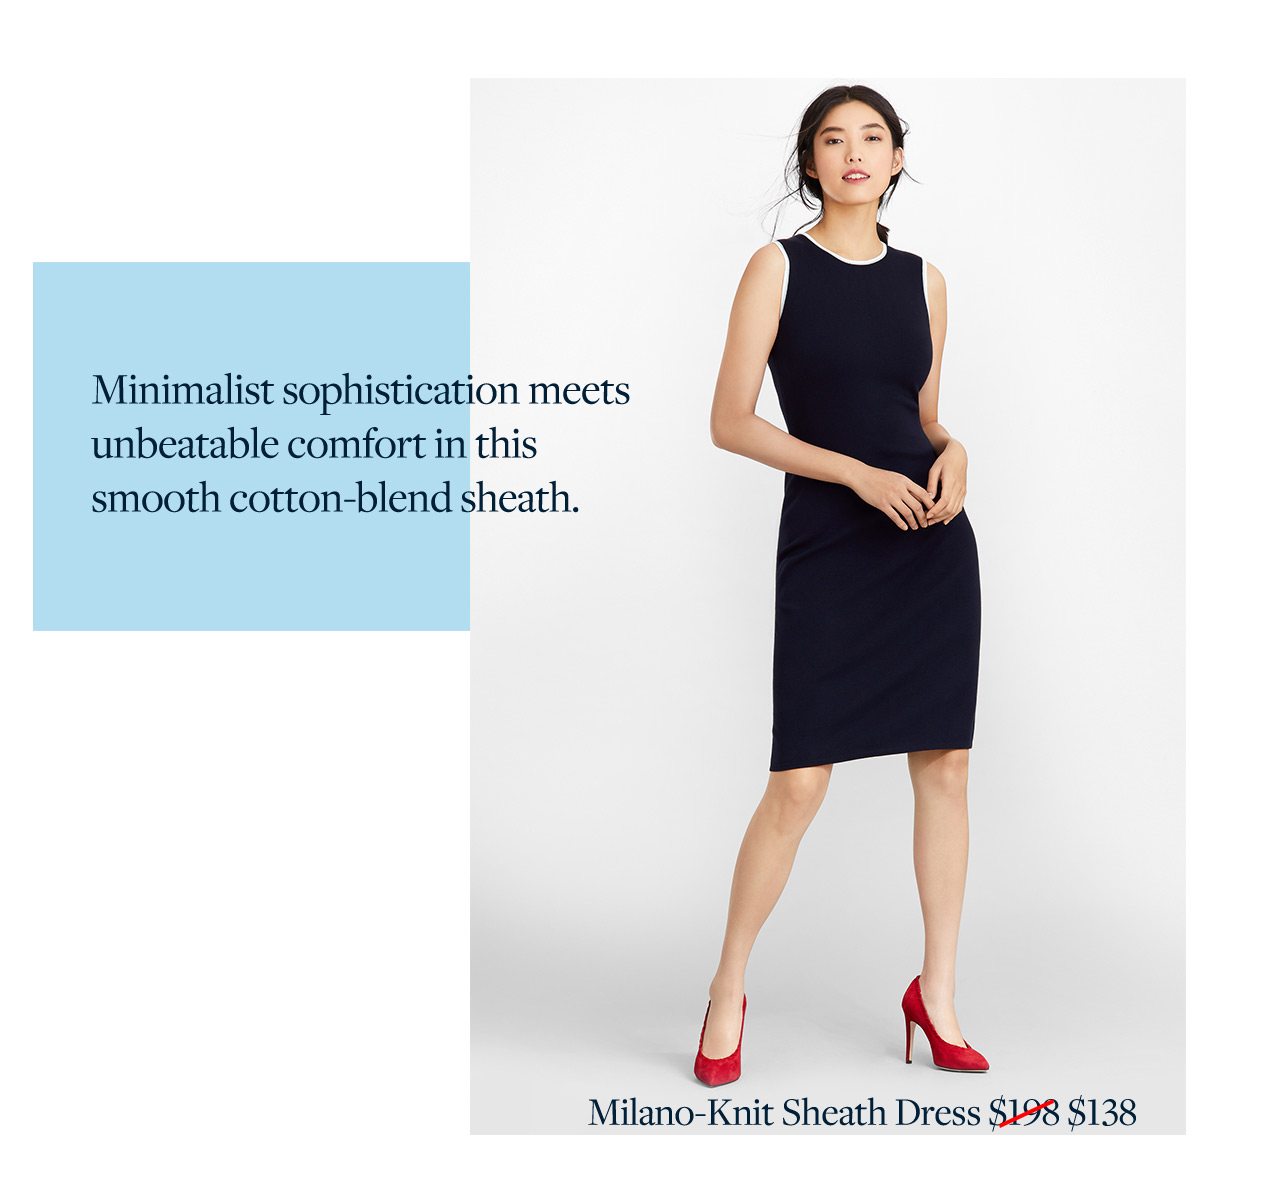 Minimalist sophistication meets unbeatable comfort in this smooth cotton-blend sheath.